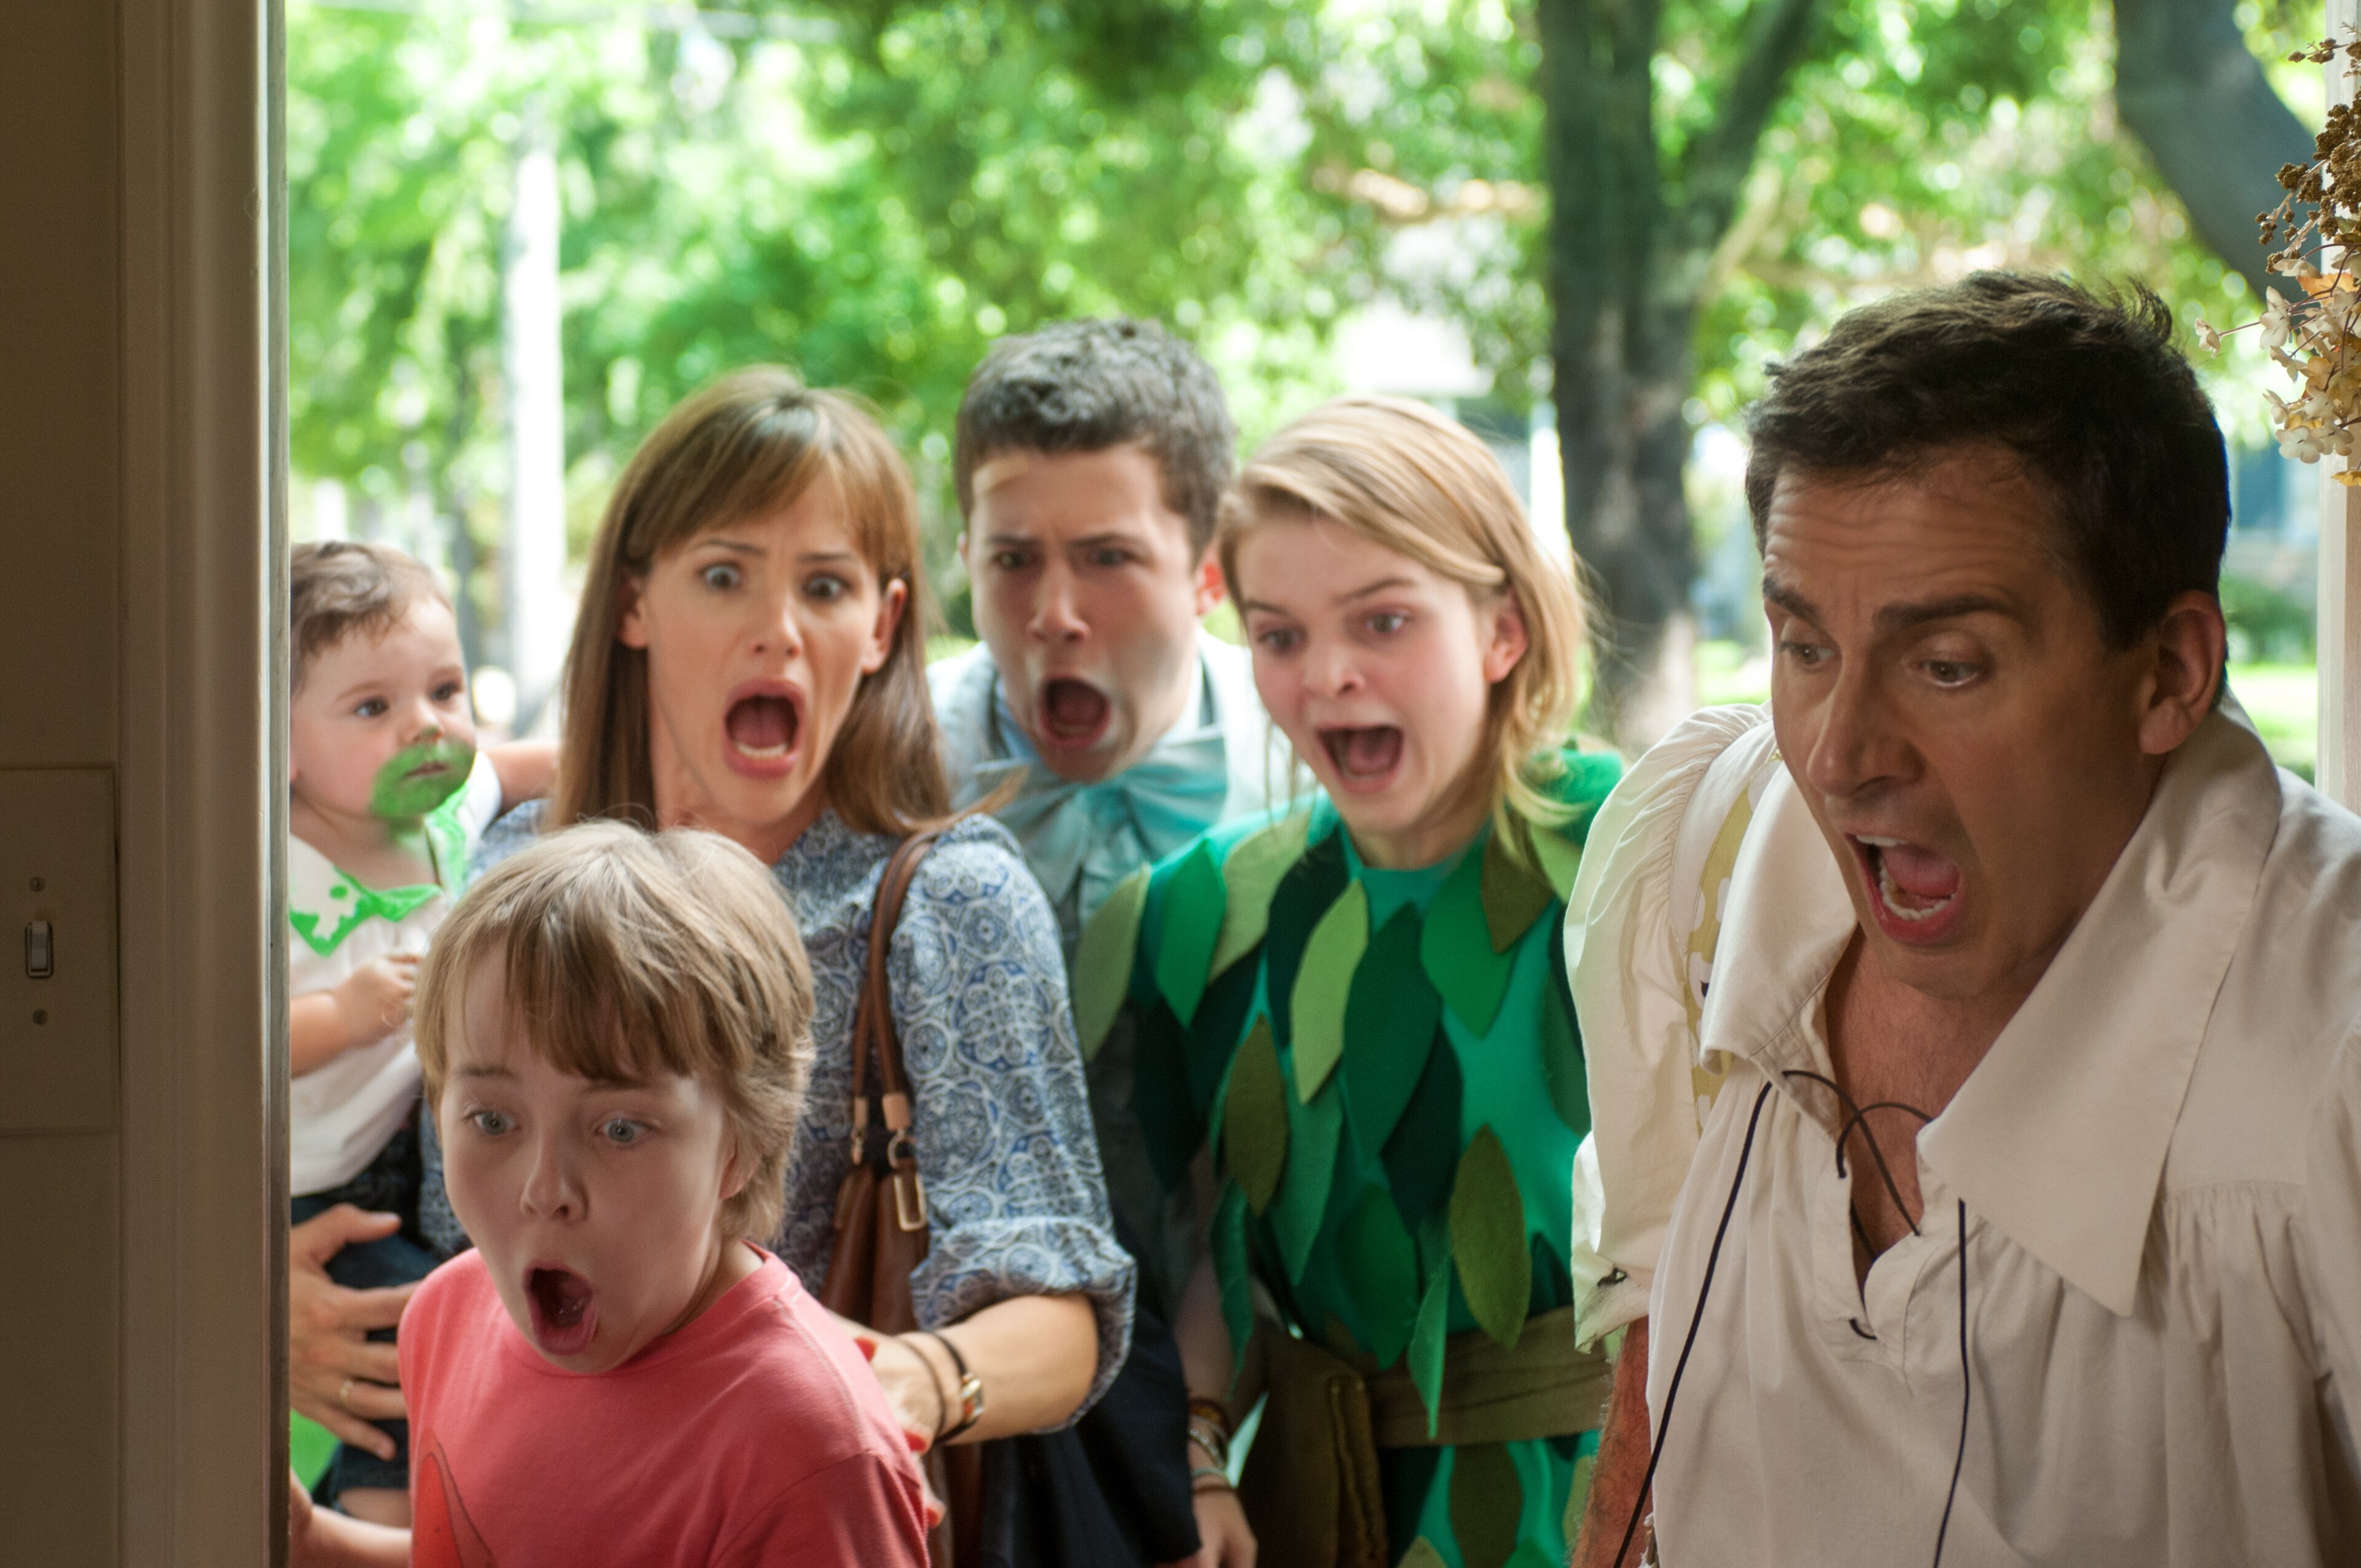 Alexander and the Terrible, Horrible, No Good, Very Bad day is now available on Blu-ray™, Digital...